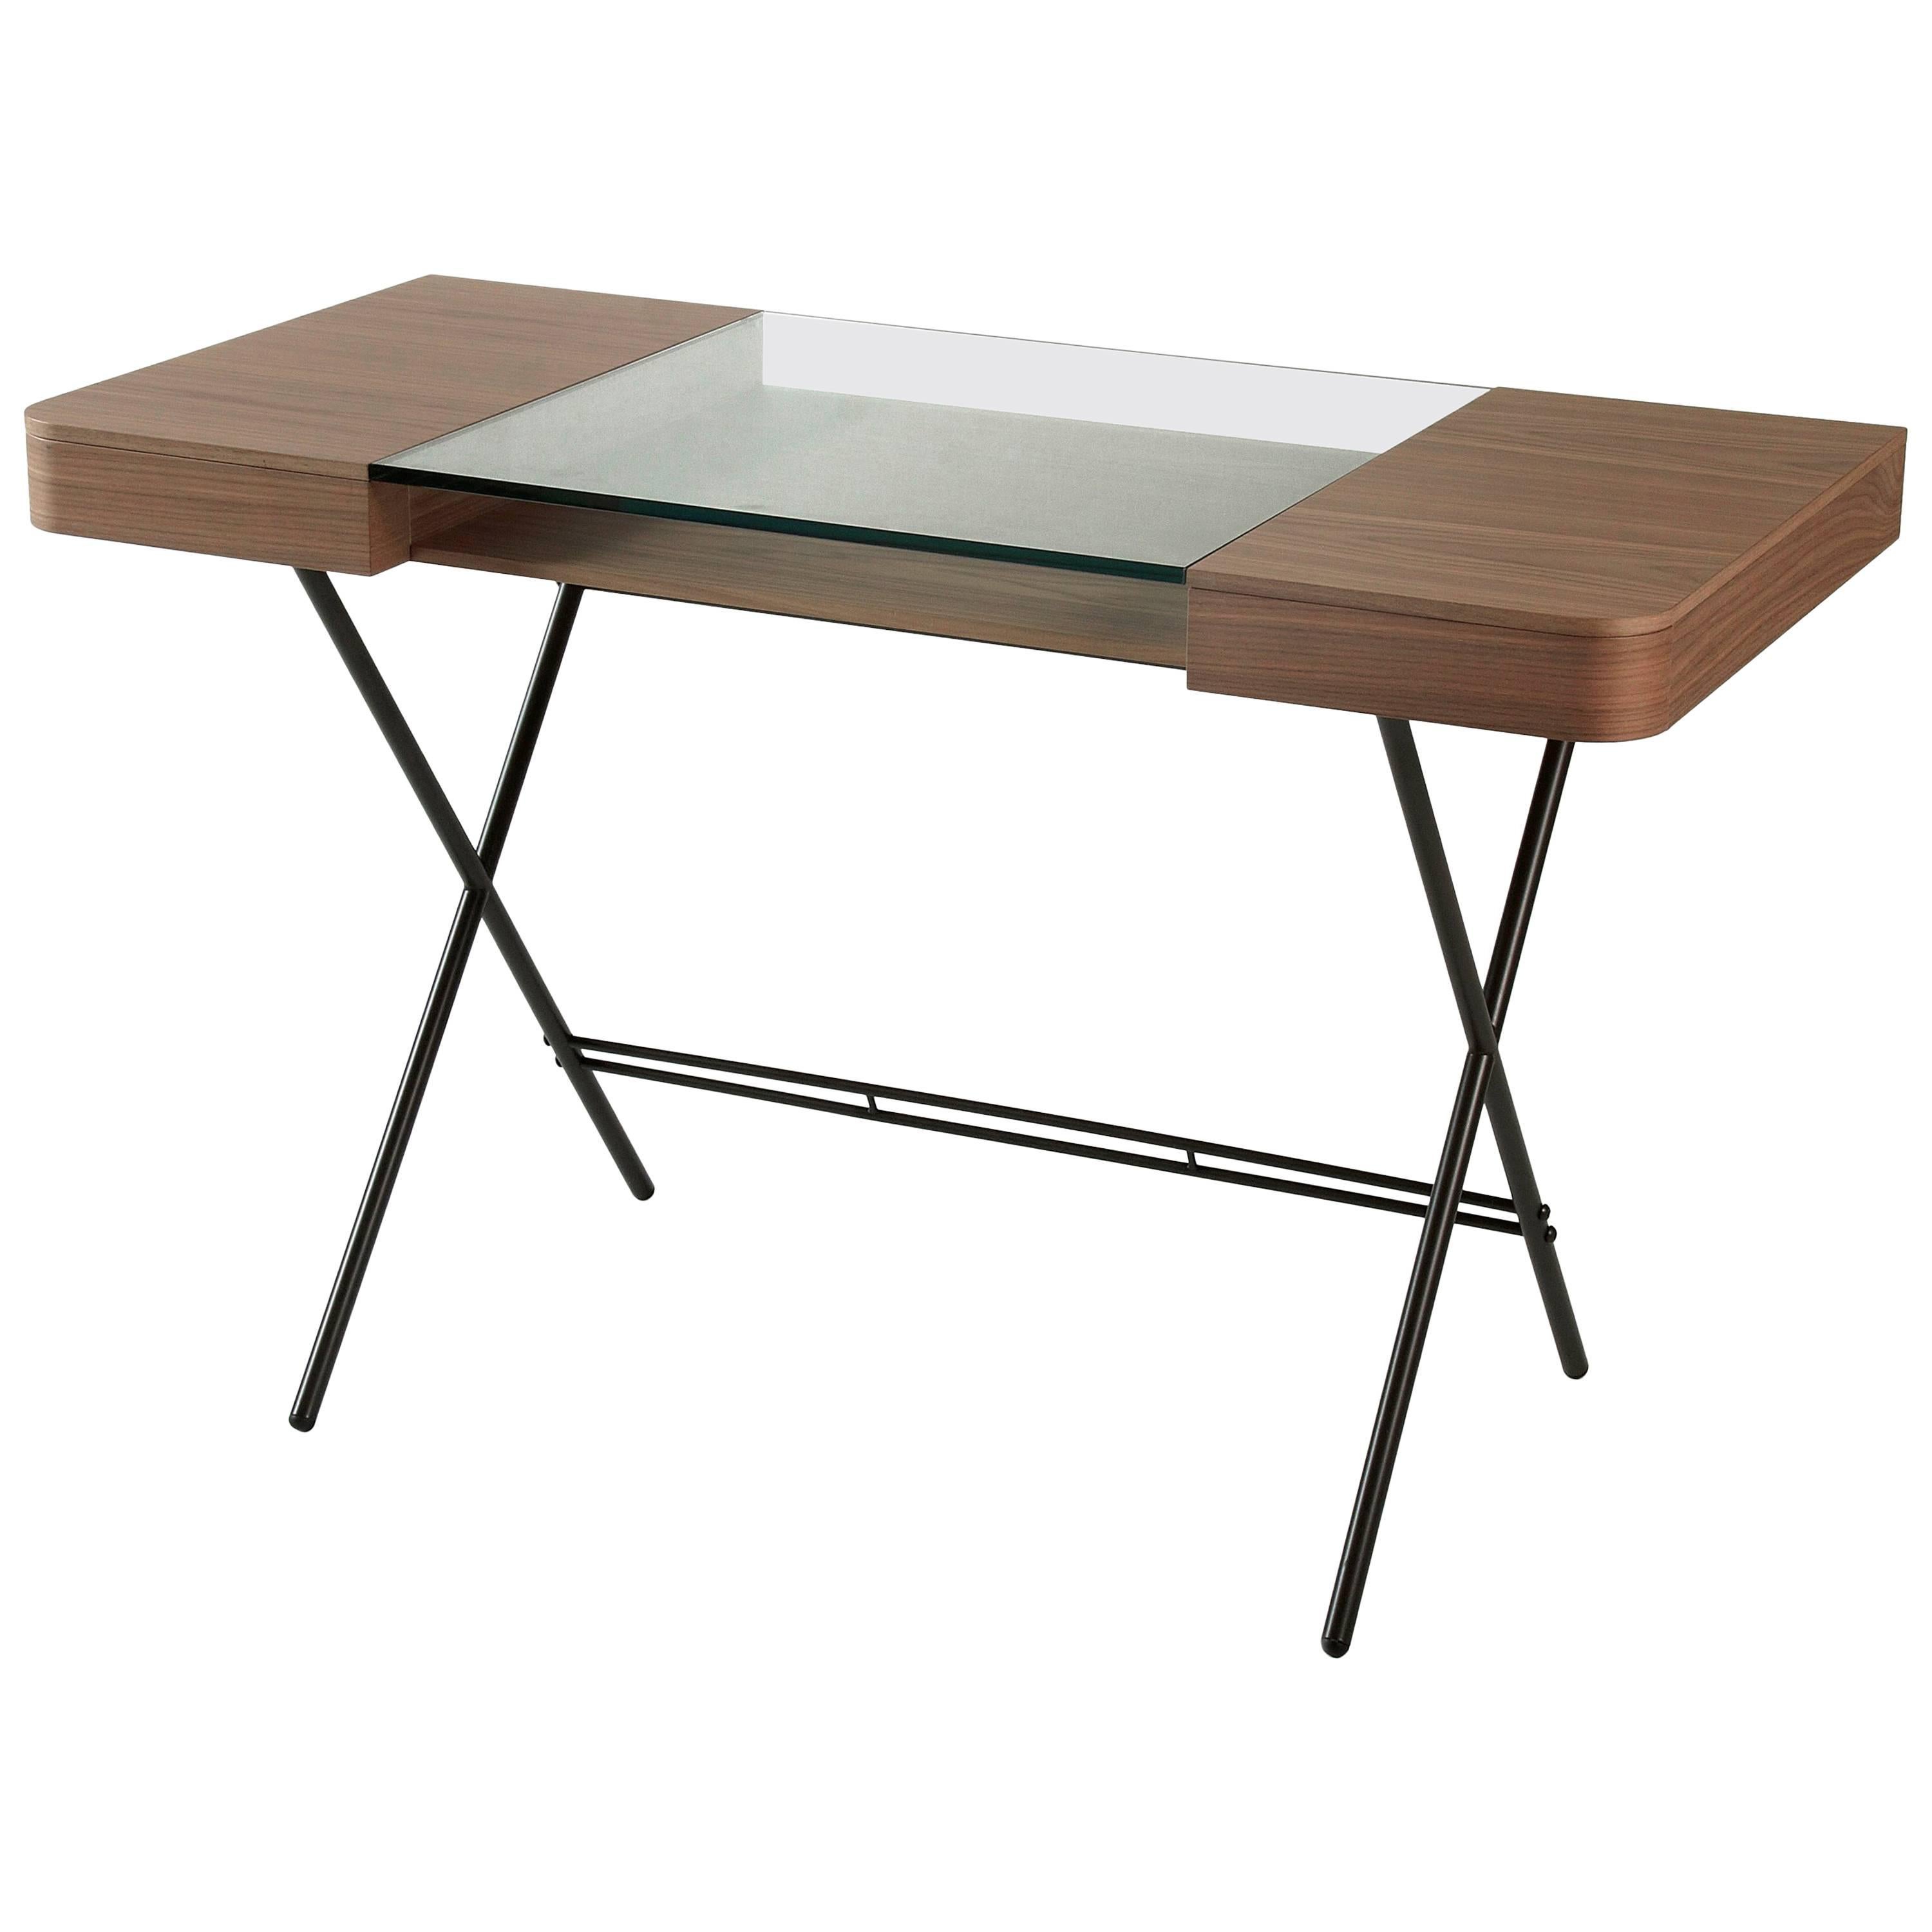 Contemporary Cosimo Desk by Marco Zanuso Jr. with Walnut Veneer and Glass Top im Angebot